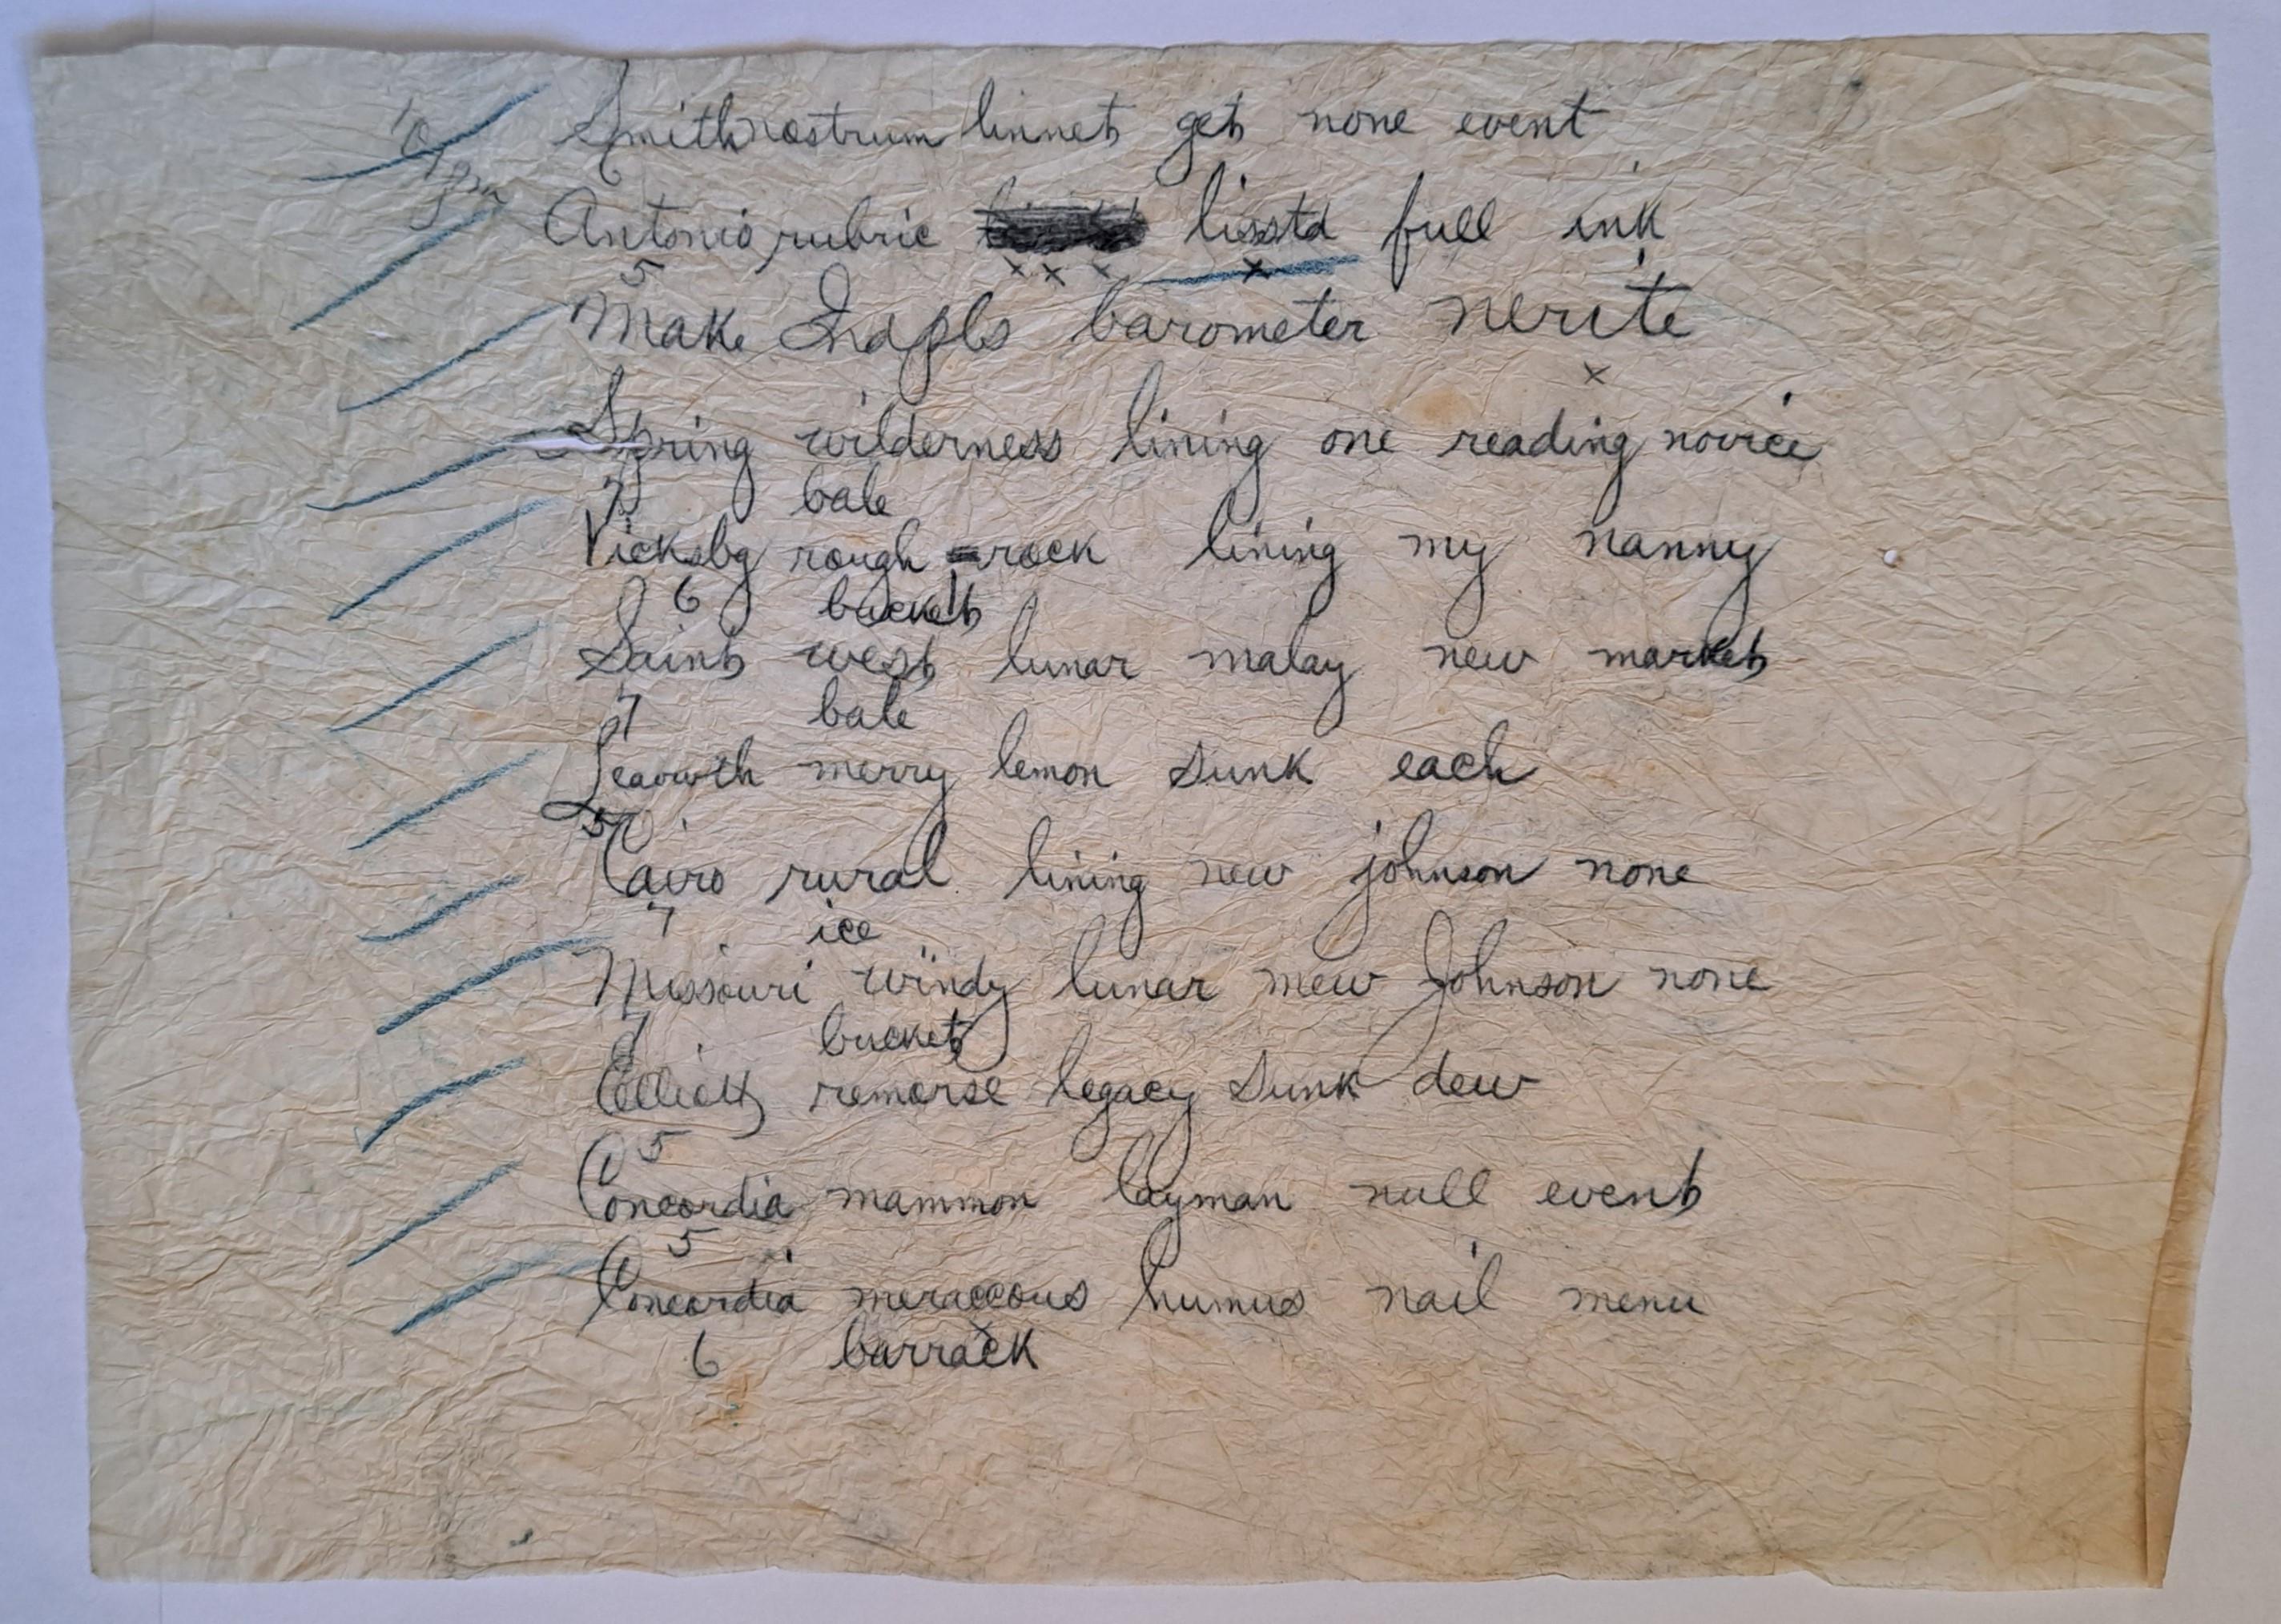 A photo of a yellowing page of crumpled paper showing 12 lines of handwritten text. Some of the lines have smudged words while the second one has a word scratched out. Each line is preceded by a blue tick. 